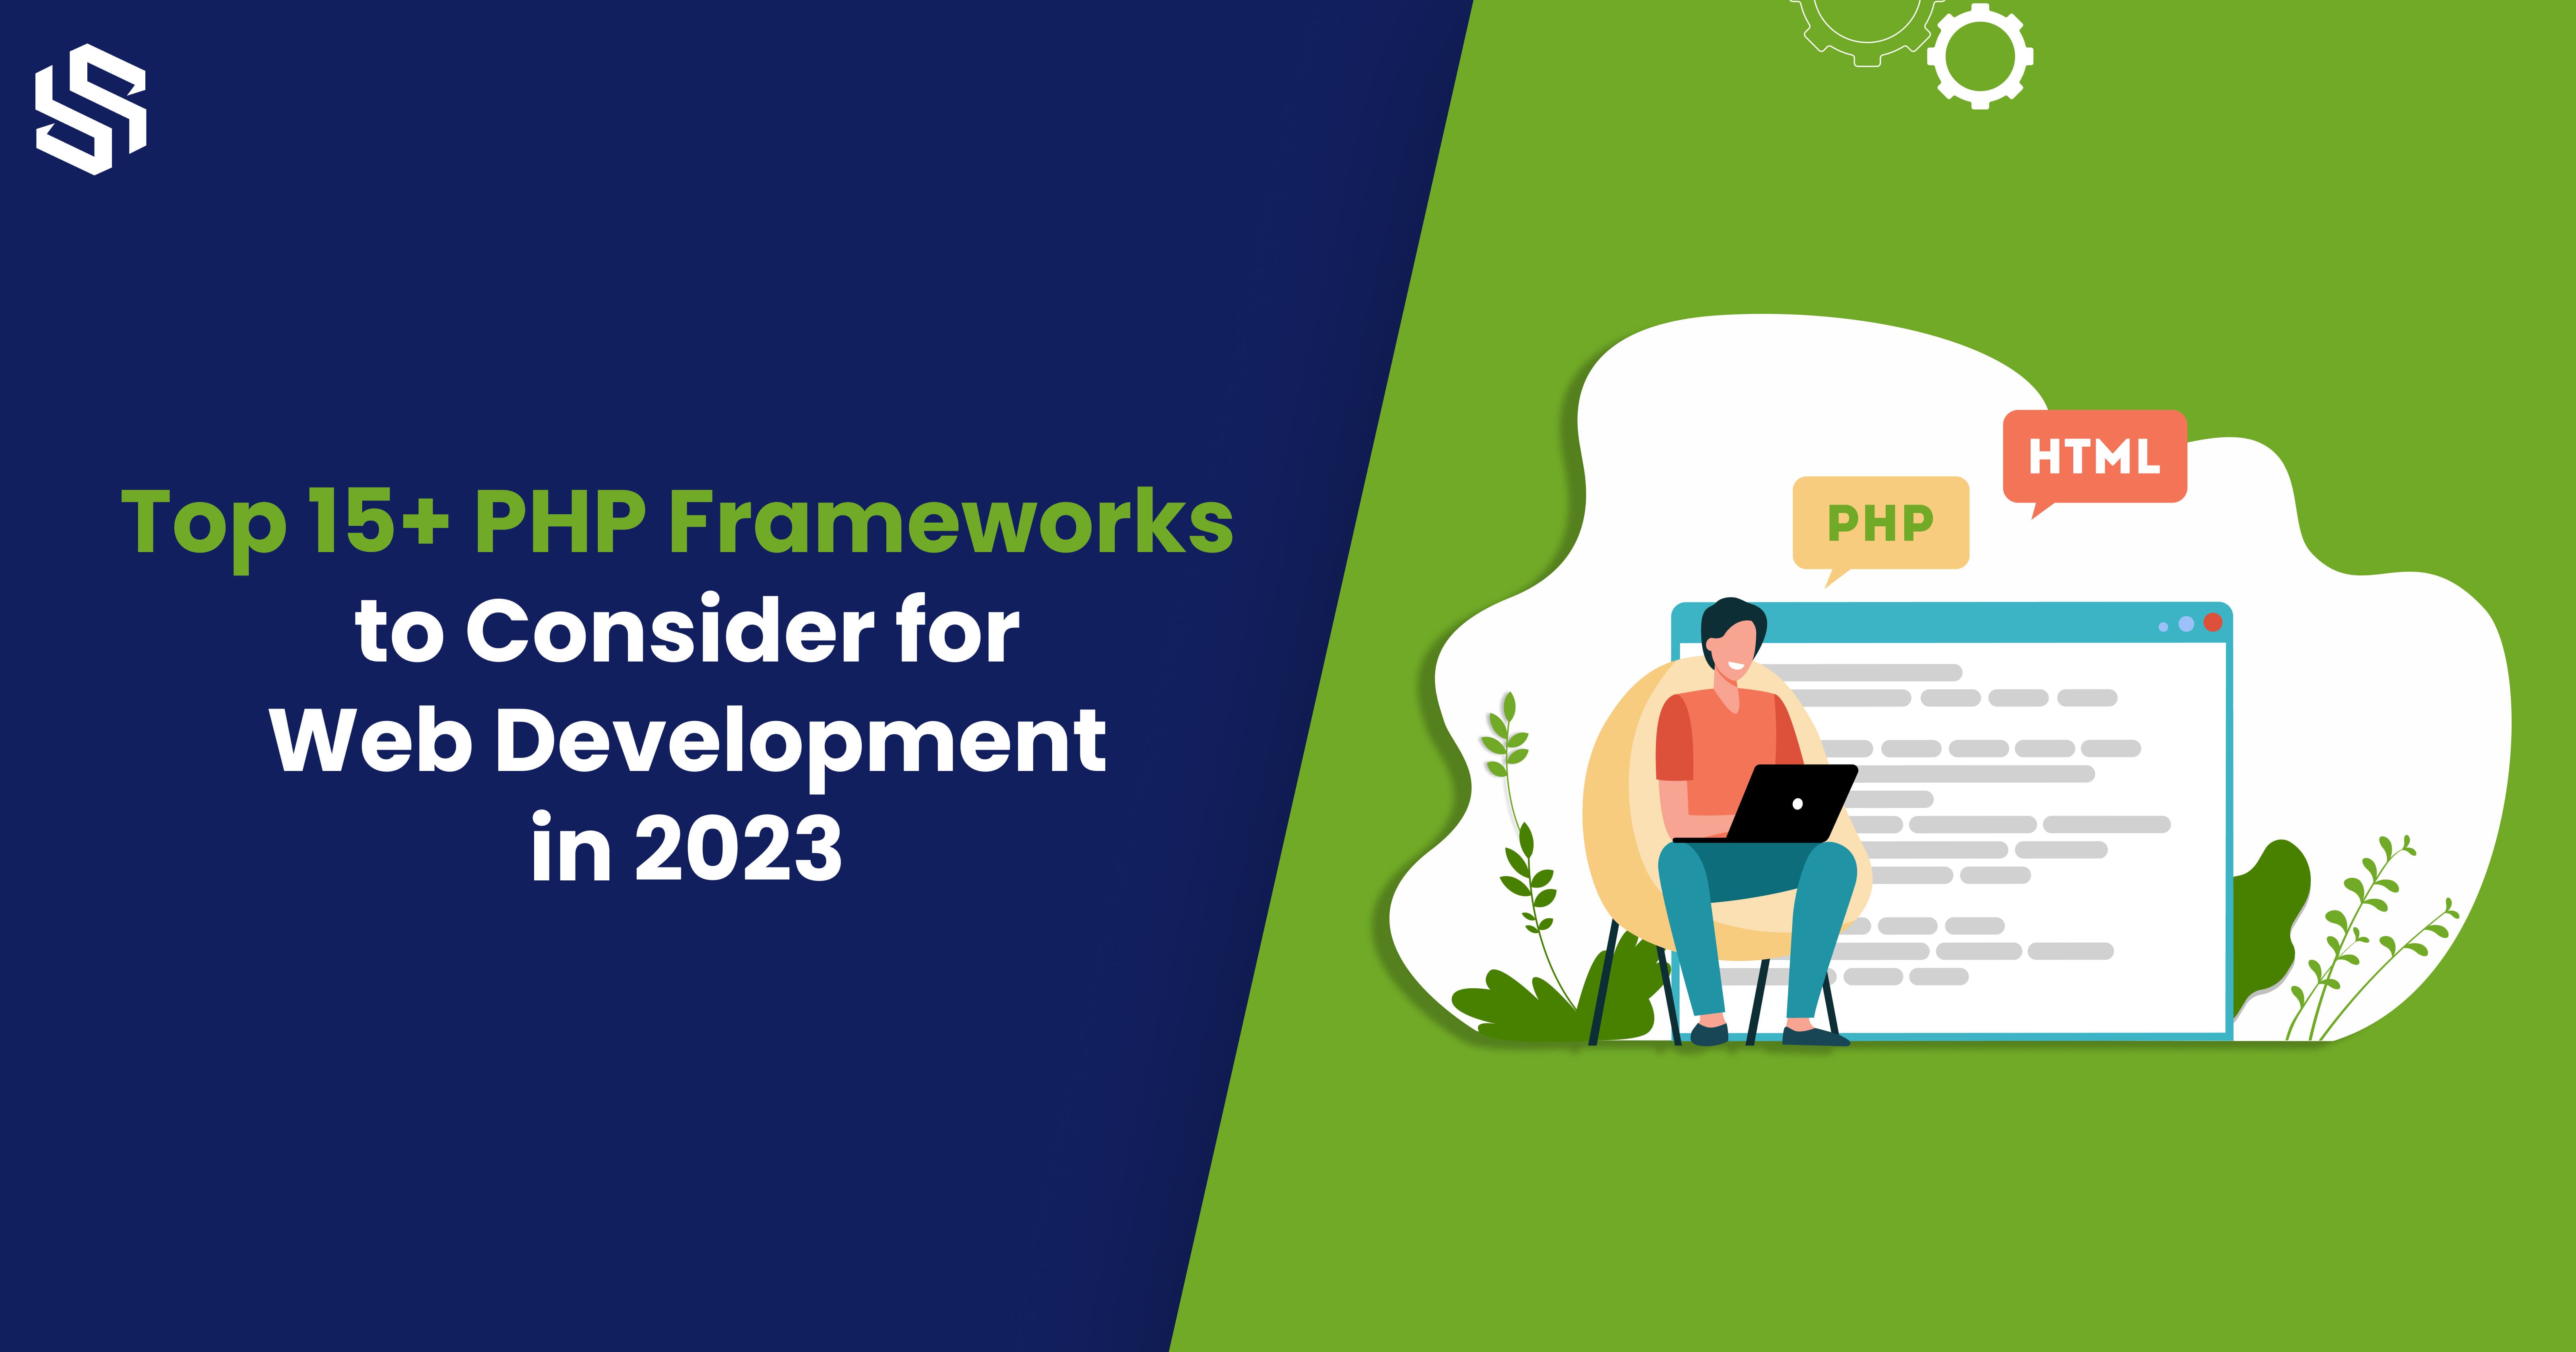 Top 15+ PHP Frameworks to Consider for Web Development in 2023